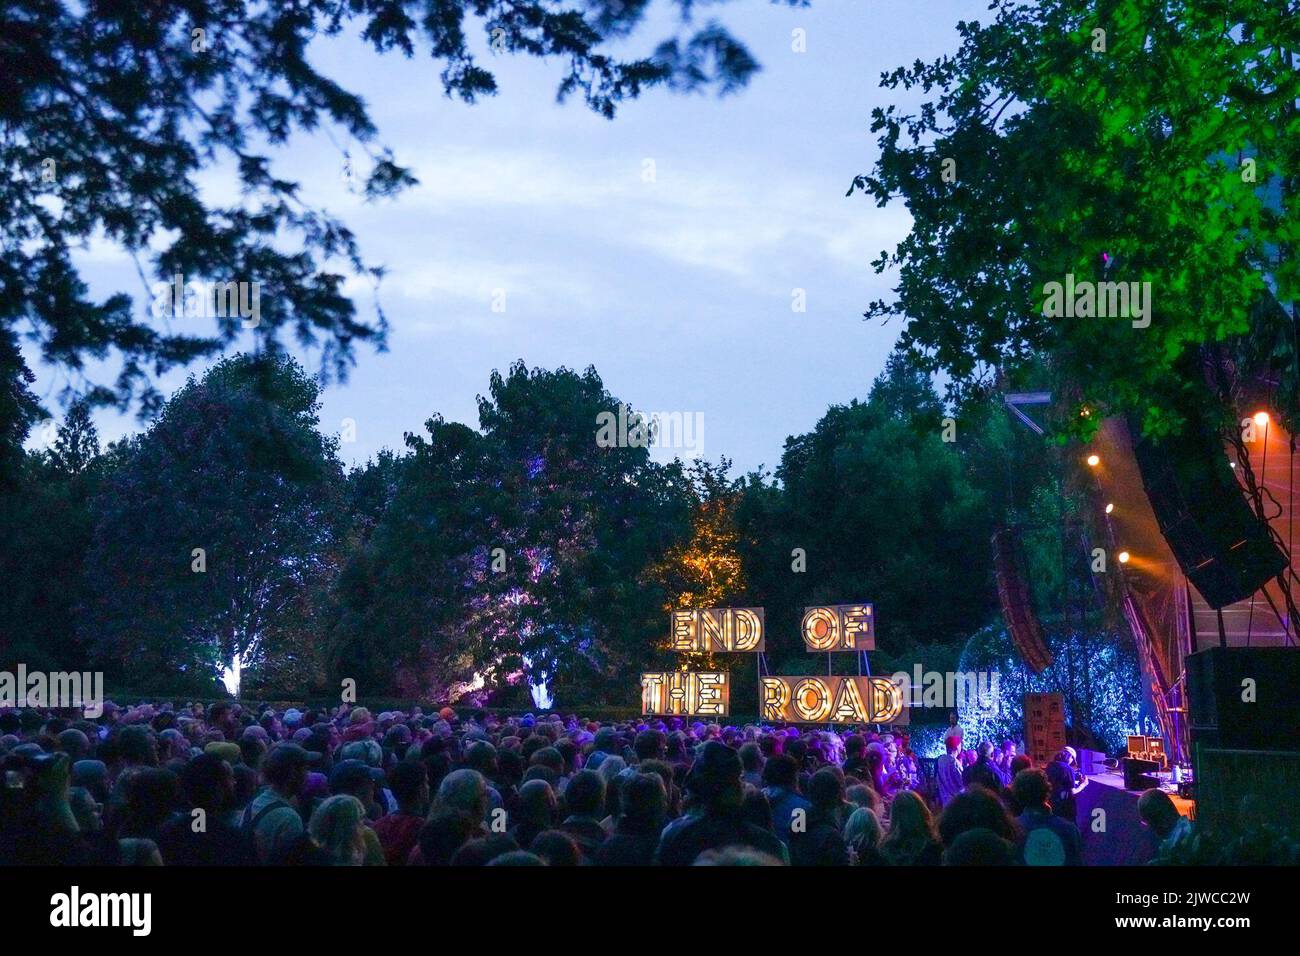 Dorset, UK. Sunday, 4 September, 2022. A view of the Garden Stage at twilight at the 2022 End of the Road Festival. Photo: Richard Gray/Alamy Stock Photo